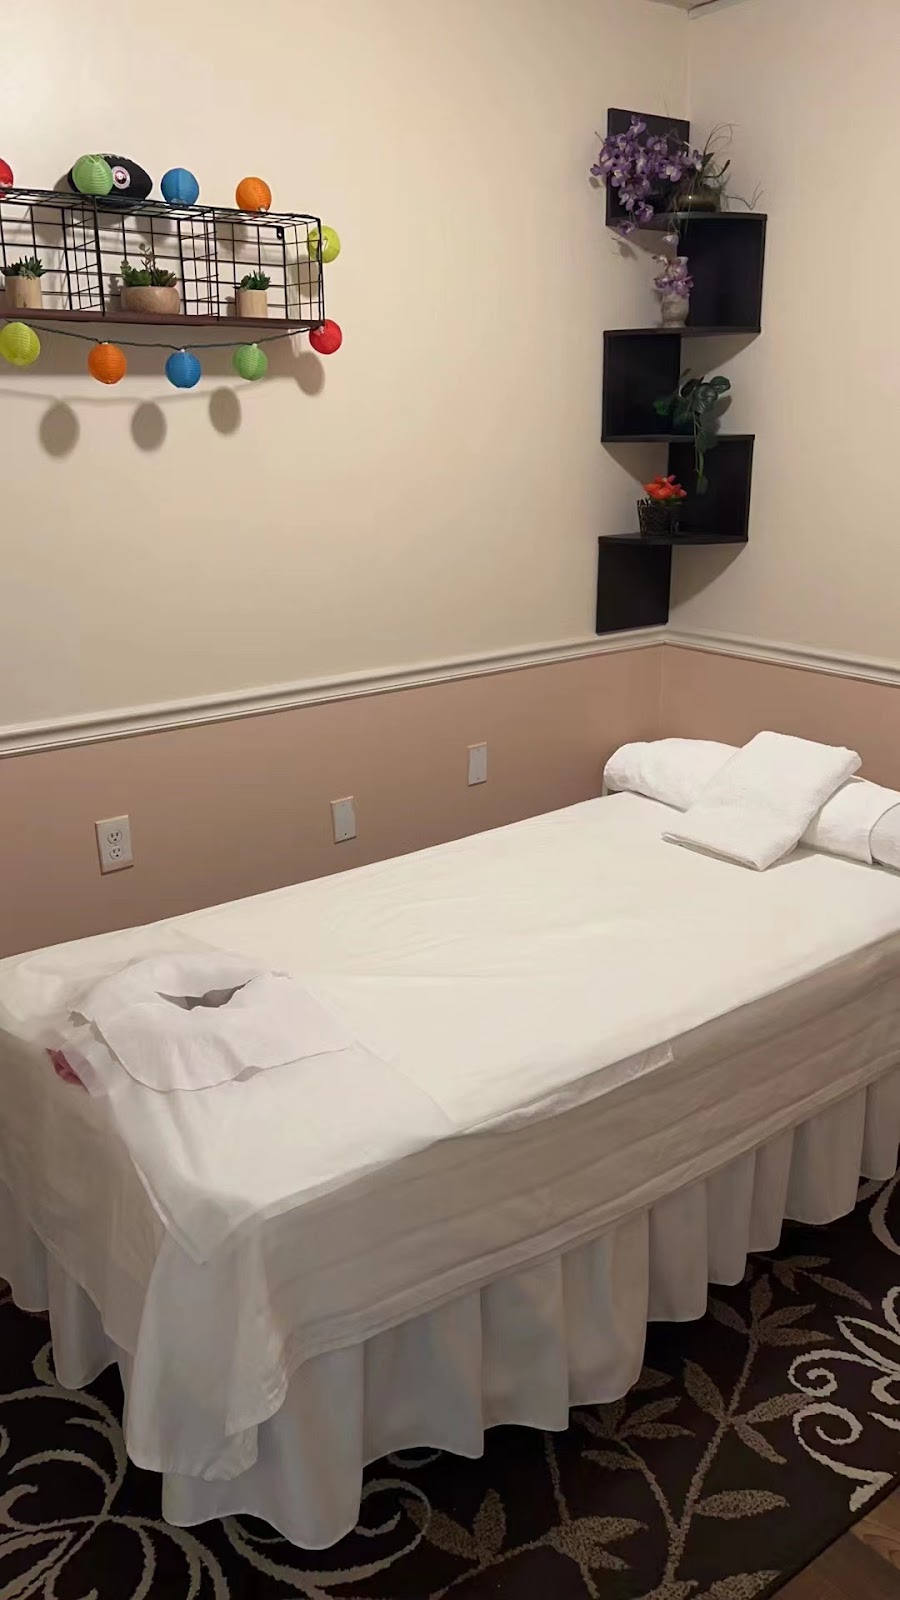 Bear Hug Massage & Spa | 2550 Brownsville Rd Suite 2, Rear, South Park Township, PA 15129, USA | Phone: (412) 440-3362